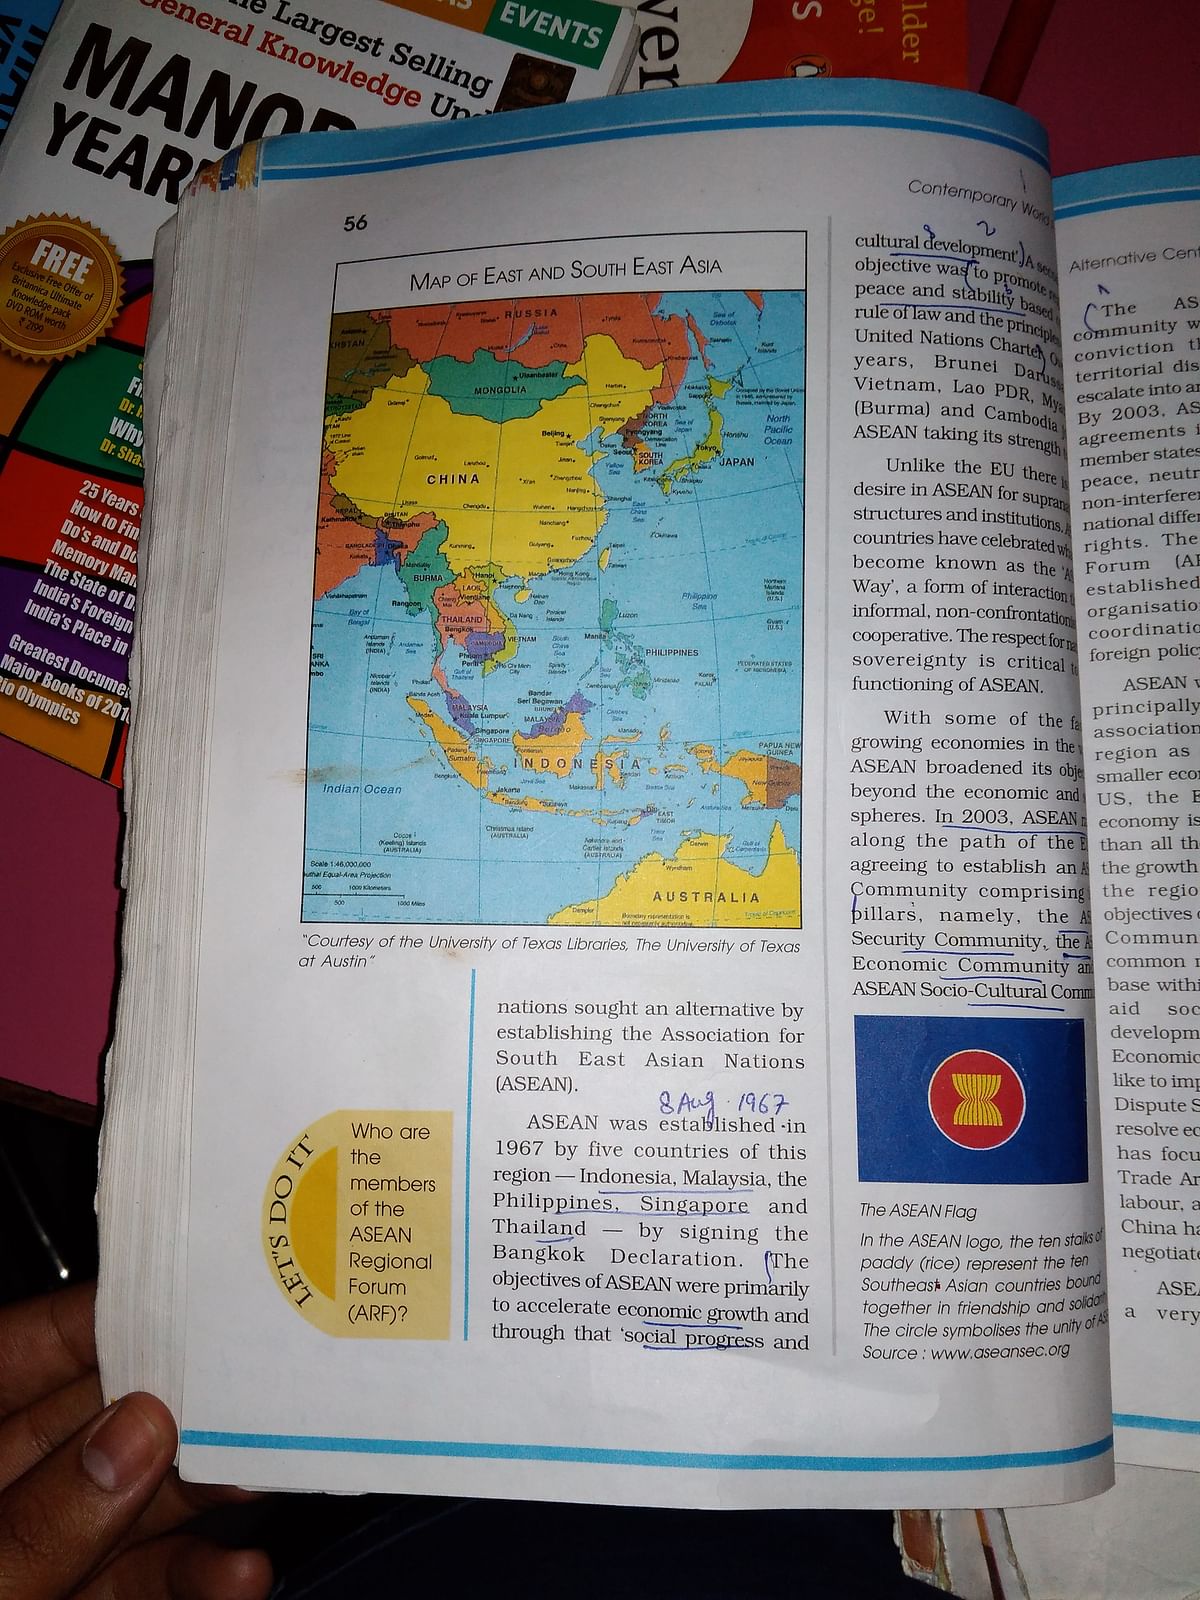 The textbook contains a map showing Aksai Chin coloured in the same yellow as China, and marked ‘Indian Claim’.